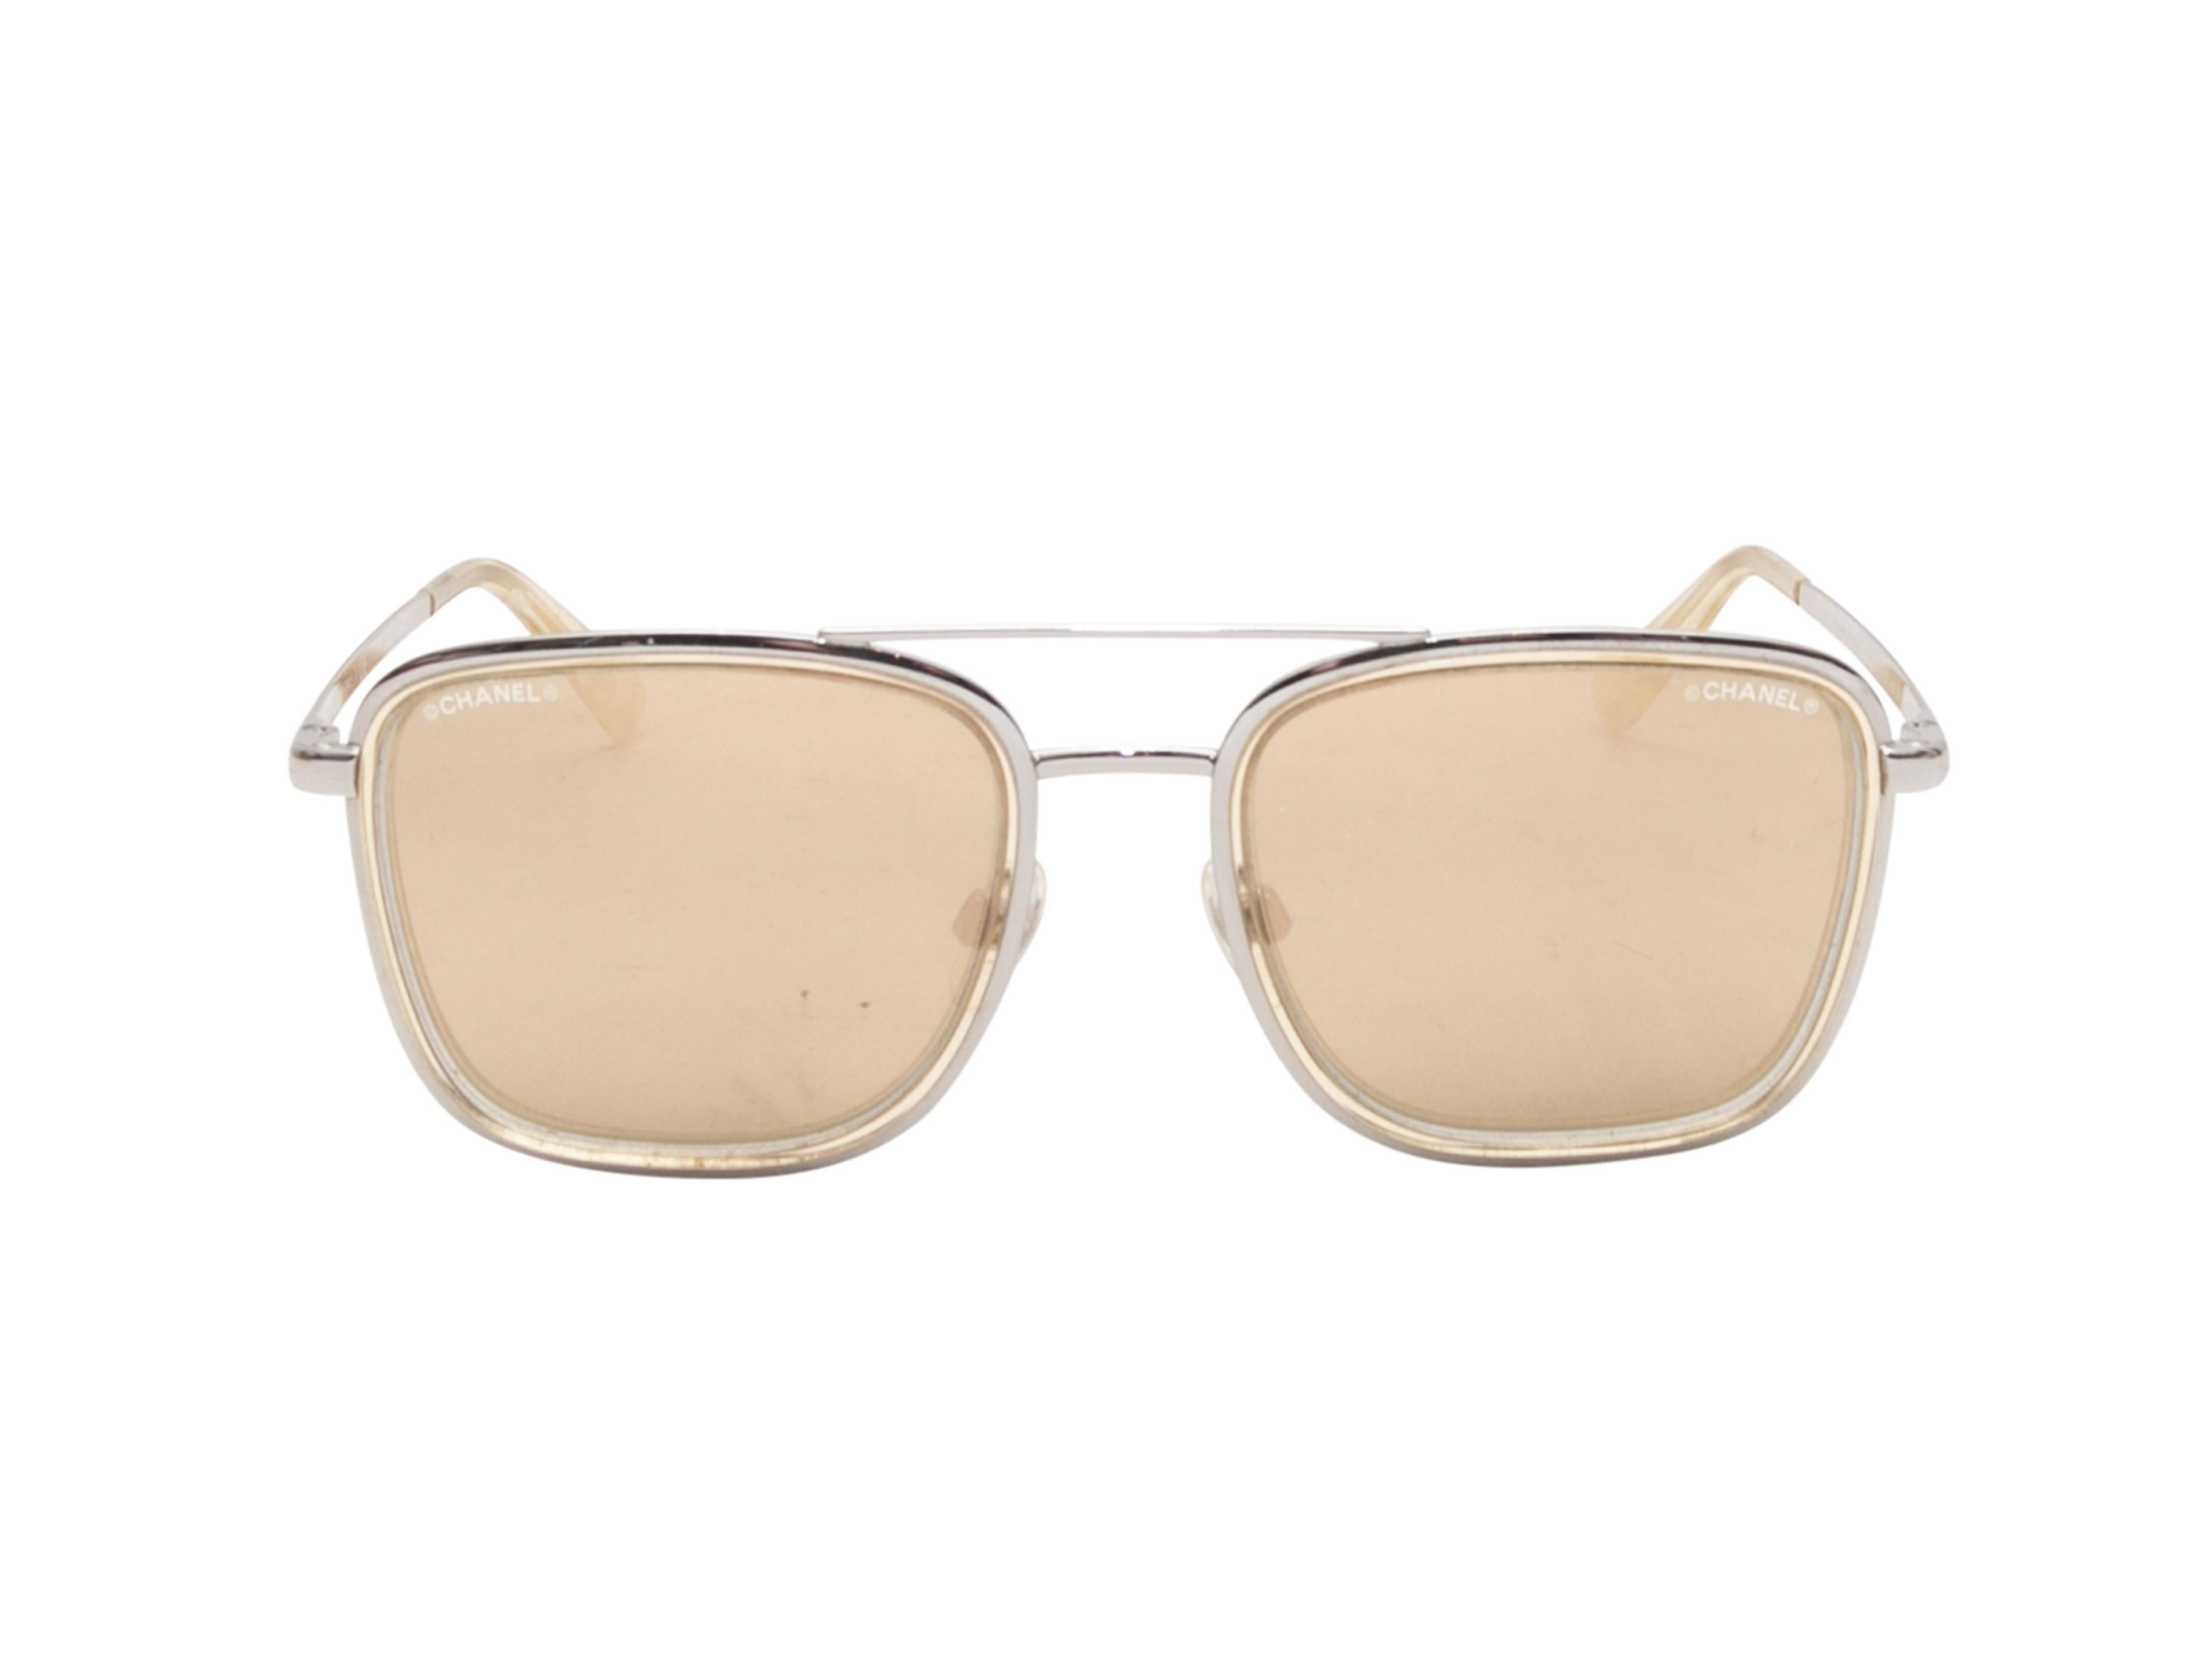 Silver-tone metal aviator sunglasses by Chanel. Brown tinted lenses. 1.75